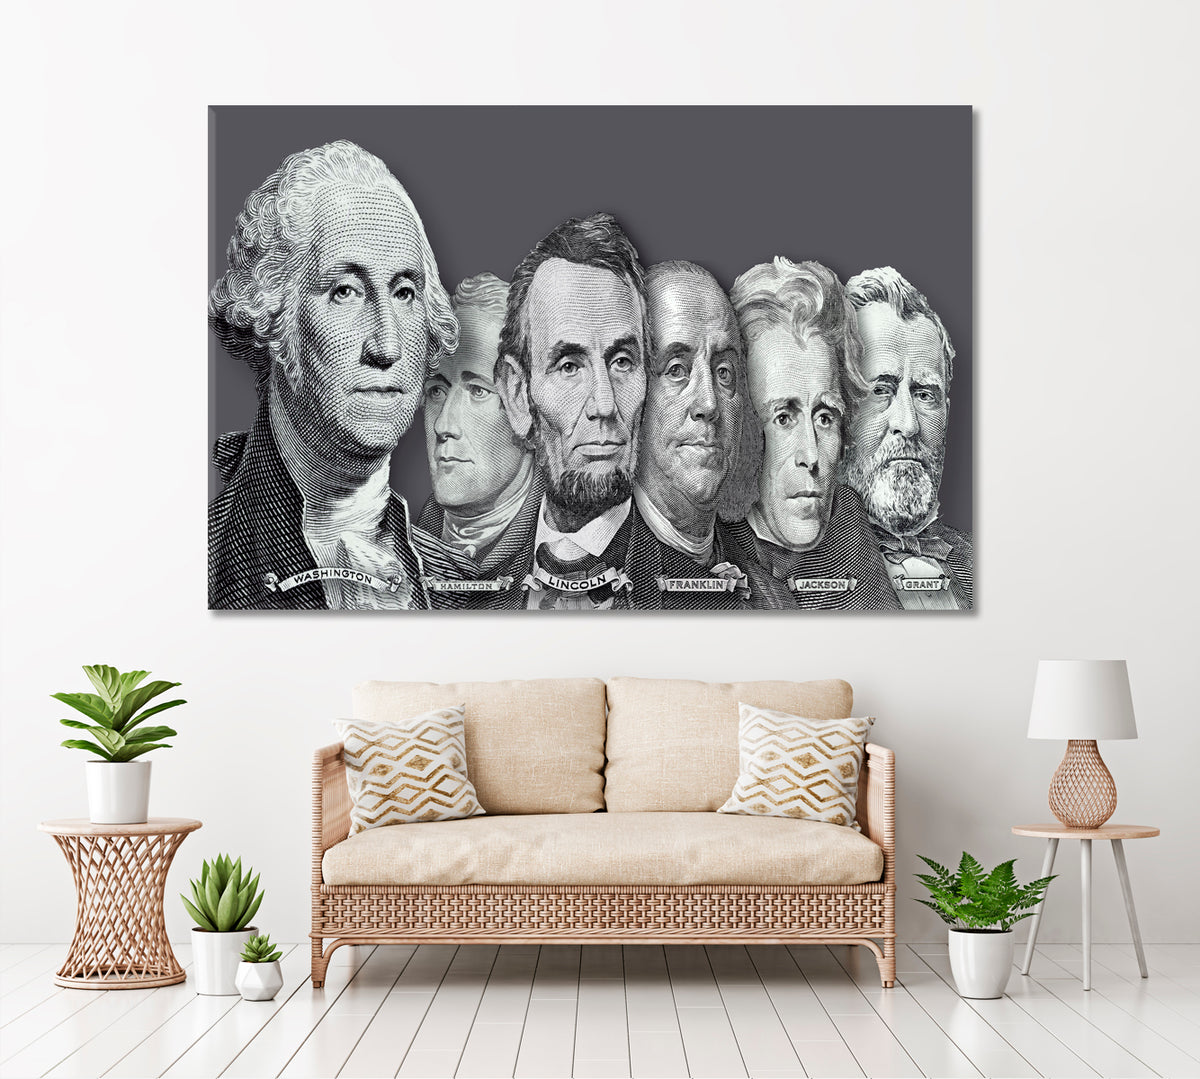 Presidents and Founding Fathers of the United States Business Concept Wall Art Artesty 1 panel 24" x 16" 